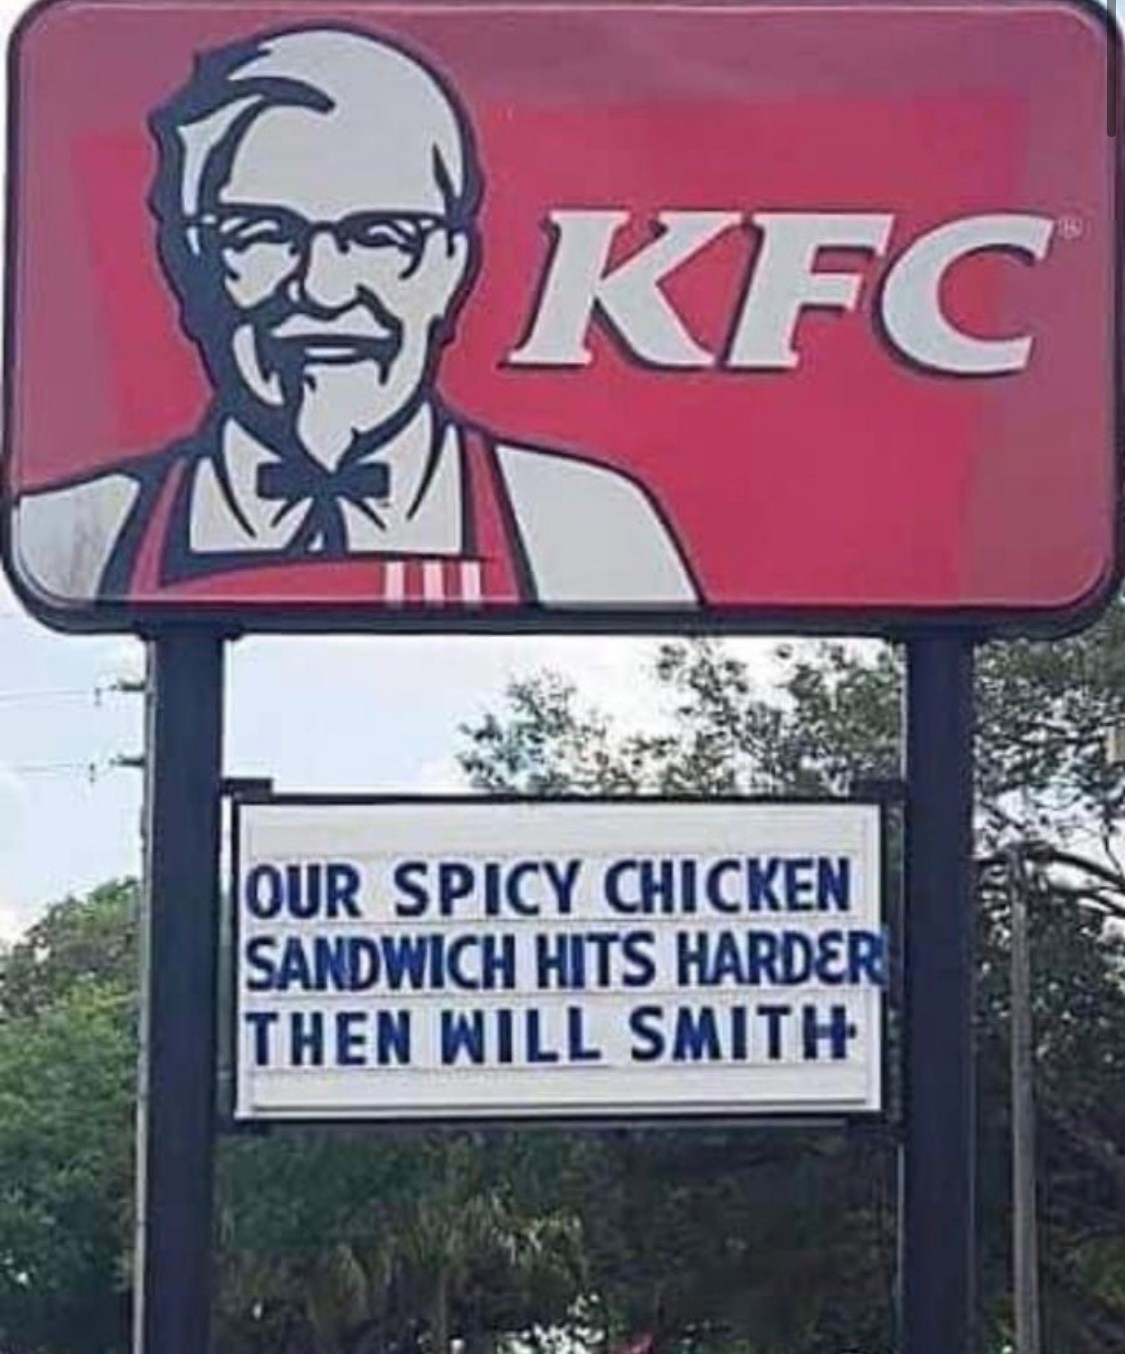 our spicy chicken sandwich hits harder than will smith, kfc